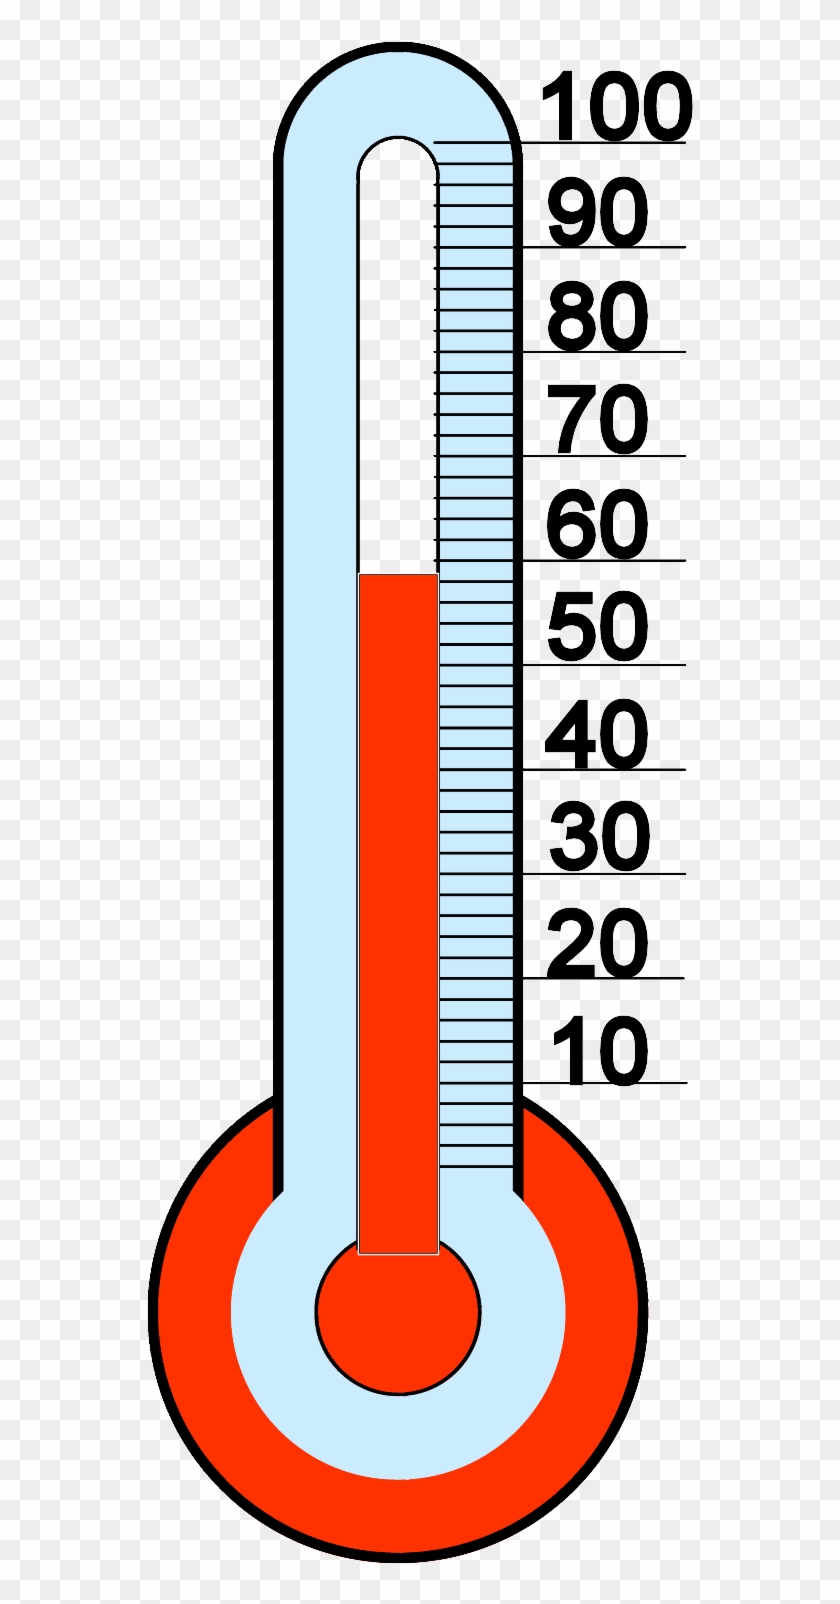 Clipart thermometer customizable. Fundraising pictures to pin